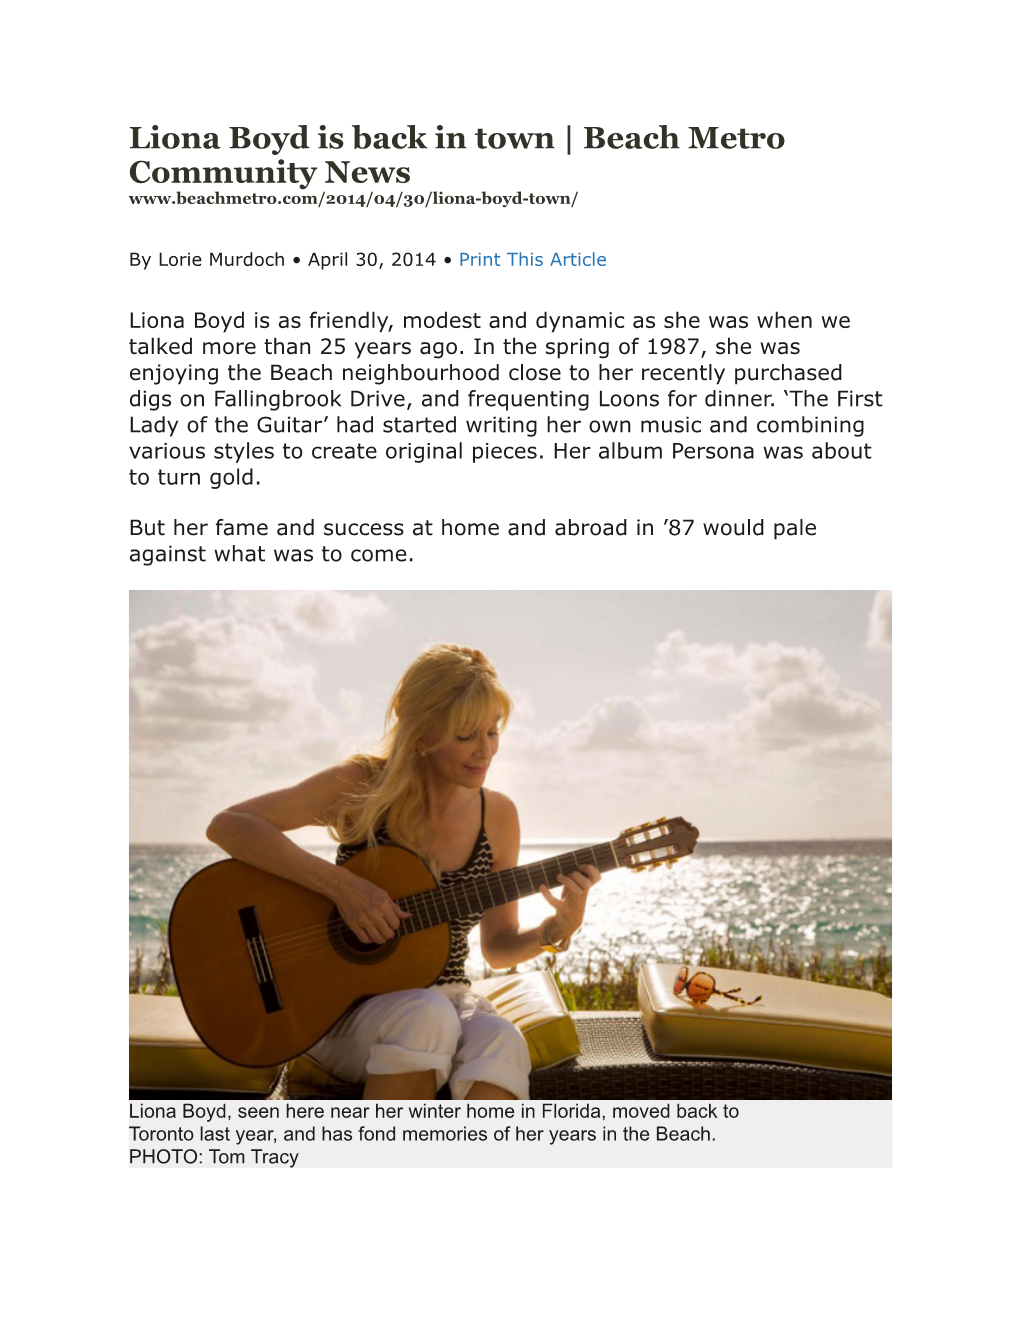 Liona Boyd Is Back in Town Beach Metro Community News Article